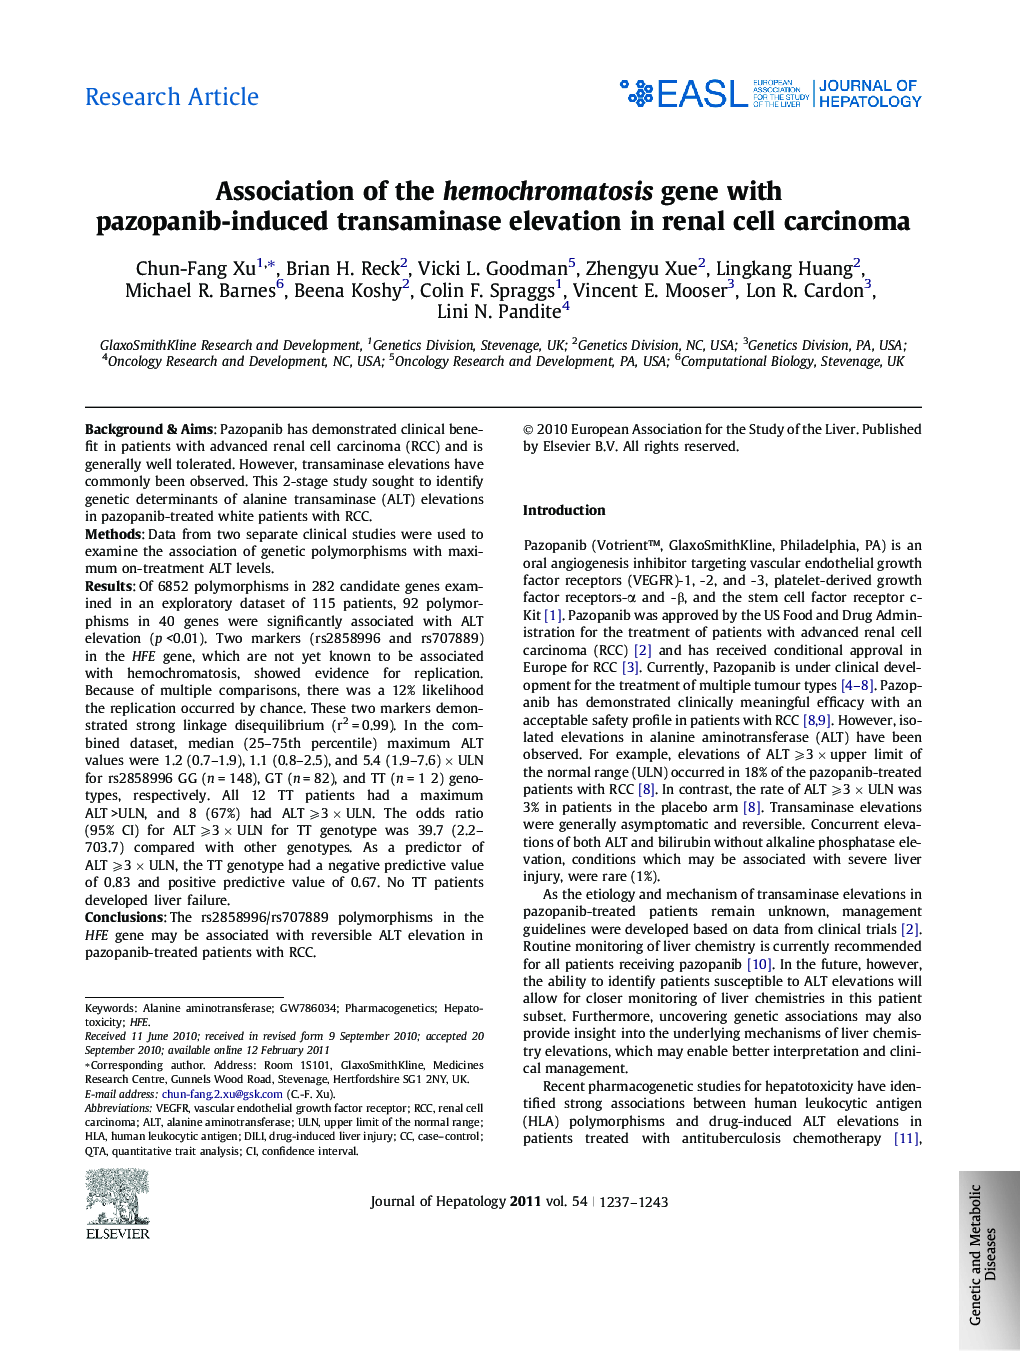 Research ArticleAssociation of the hemochromatosis gene with pazopanib-induced transaminase elevation in renal cell carcinoma